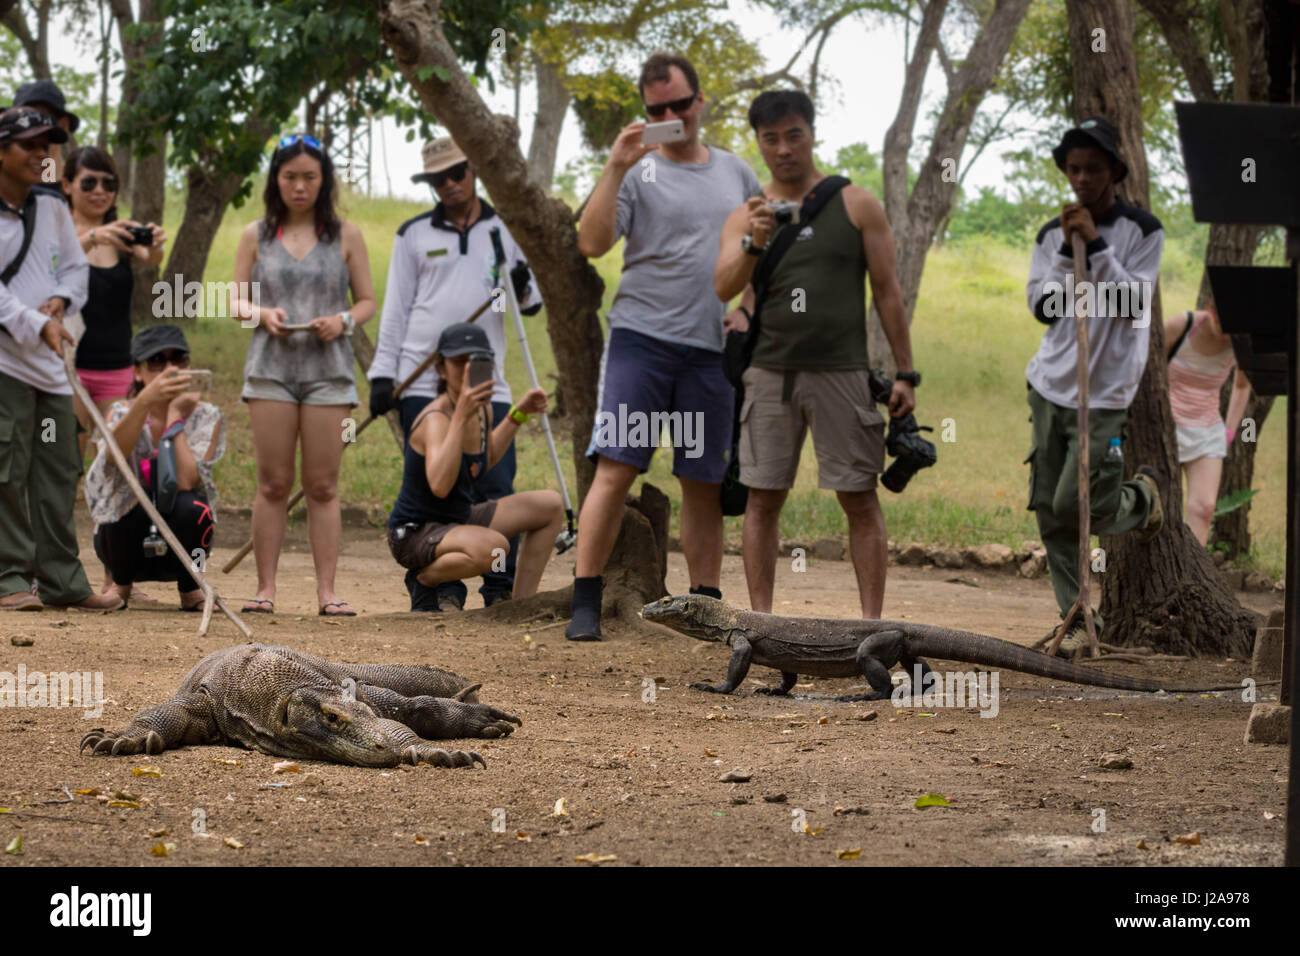 The Komodo dragons on Rinca island aren't particularly interested in the human visitors, and so are easy to photograph. Stock Photo